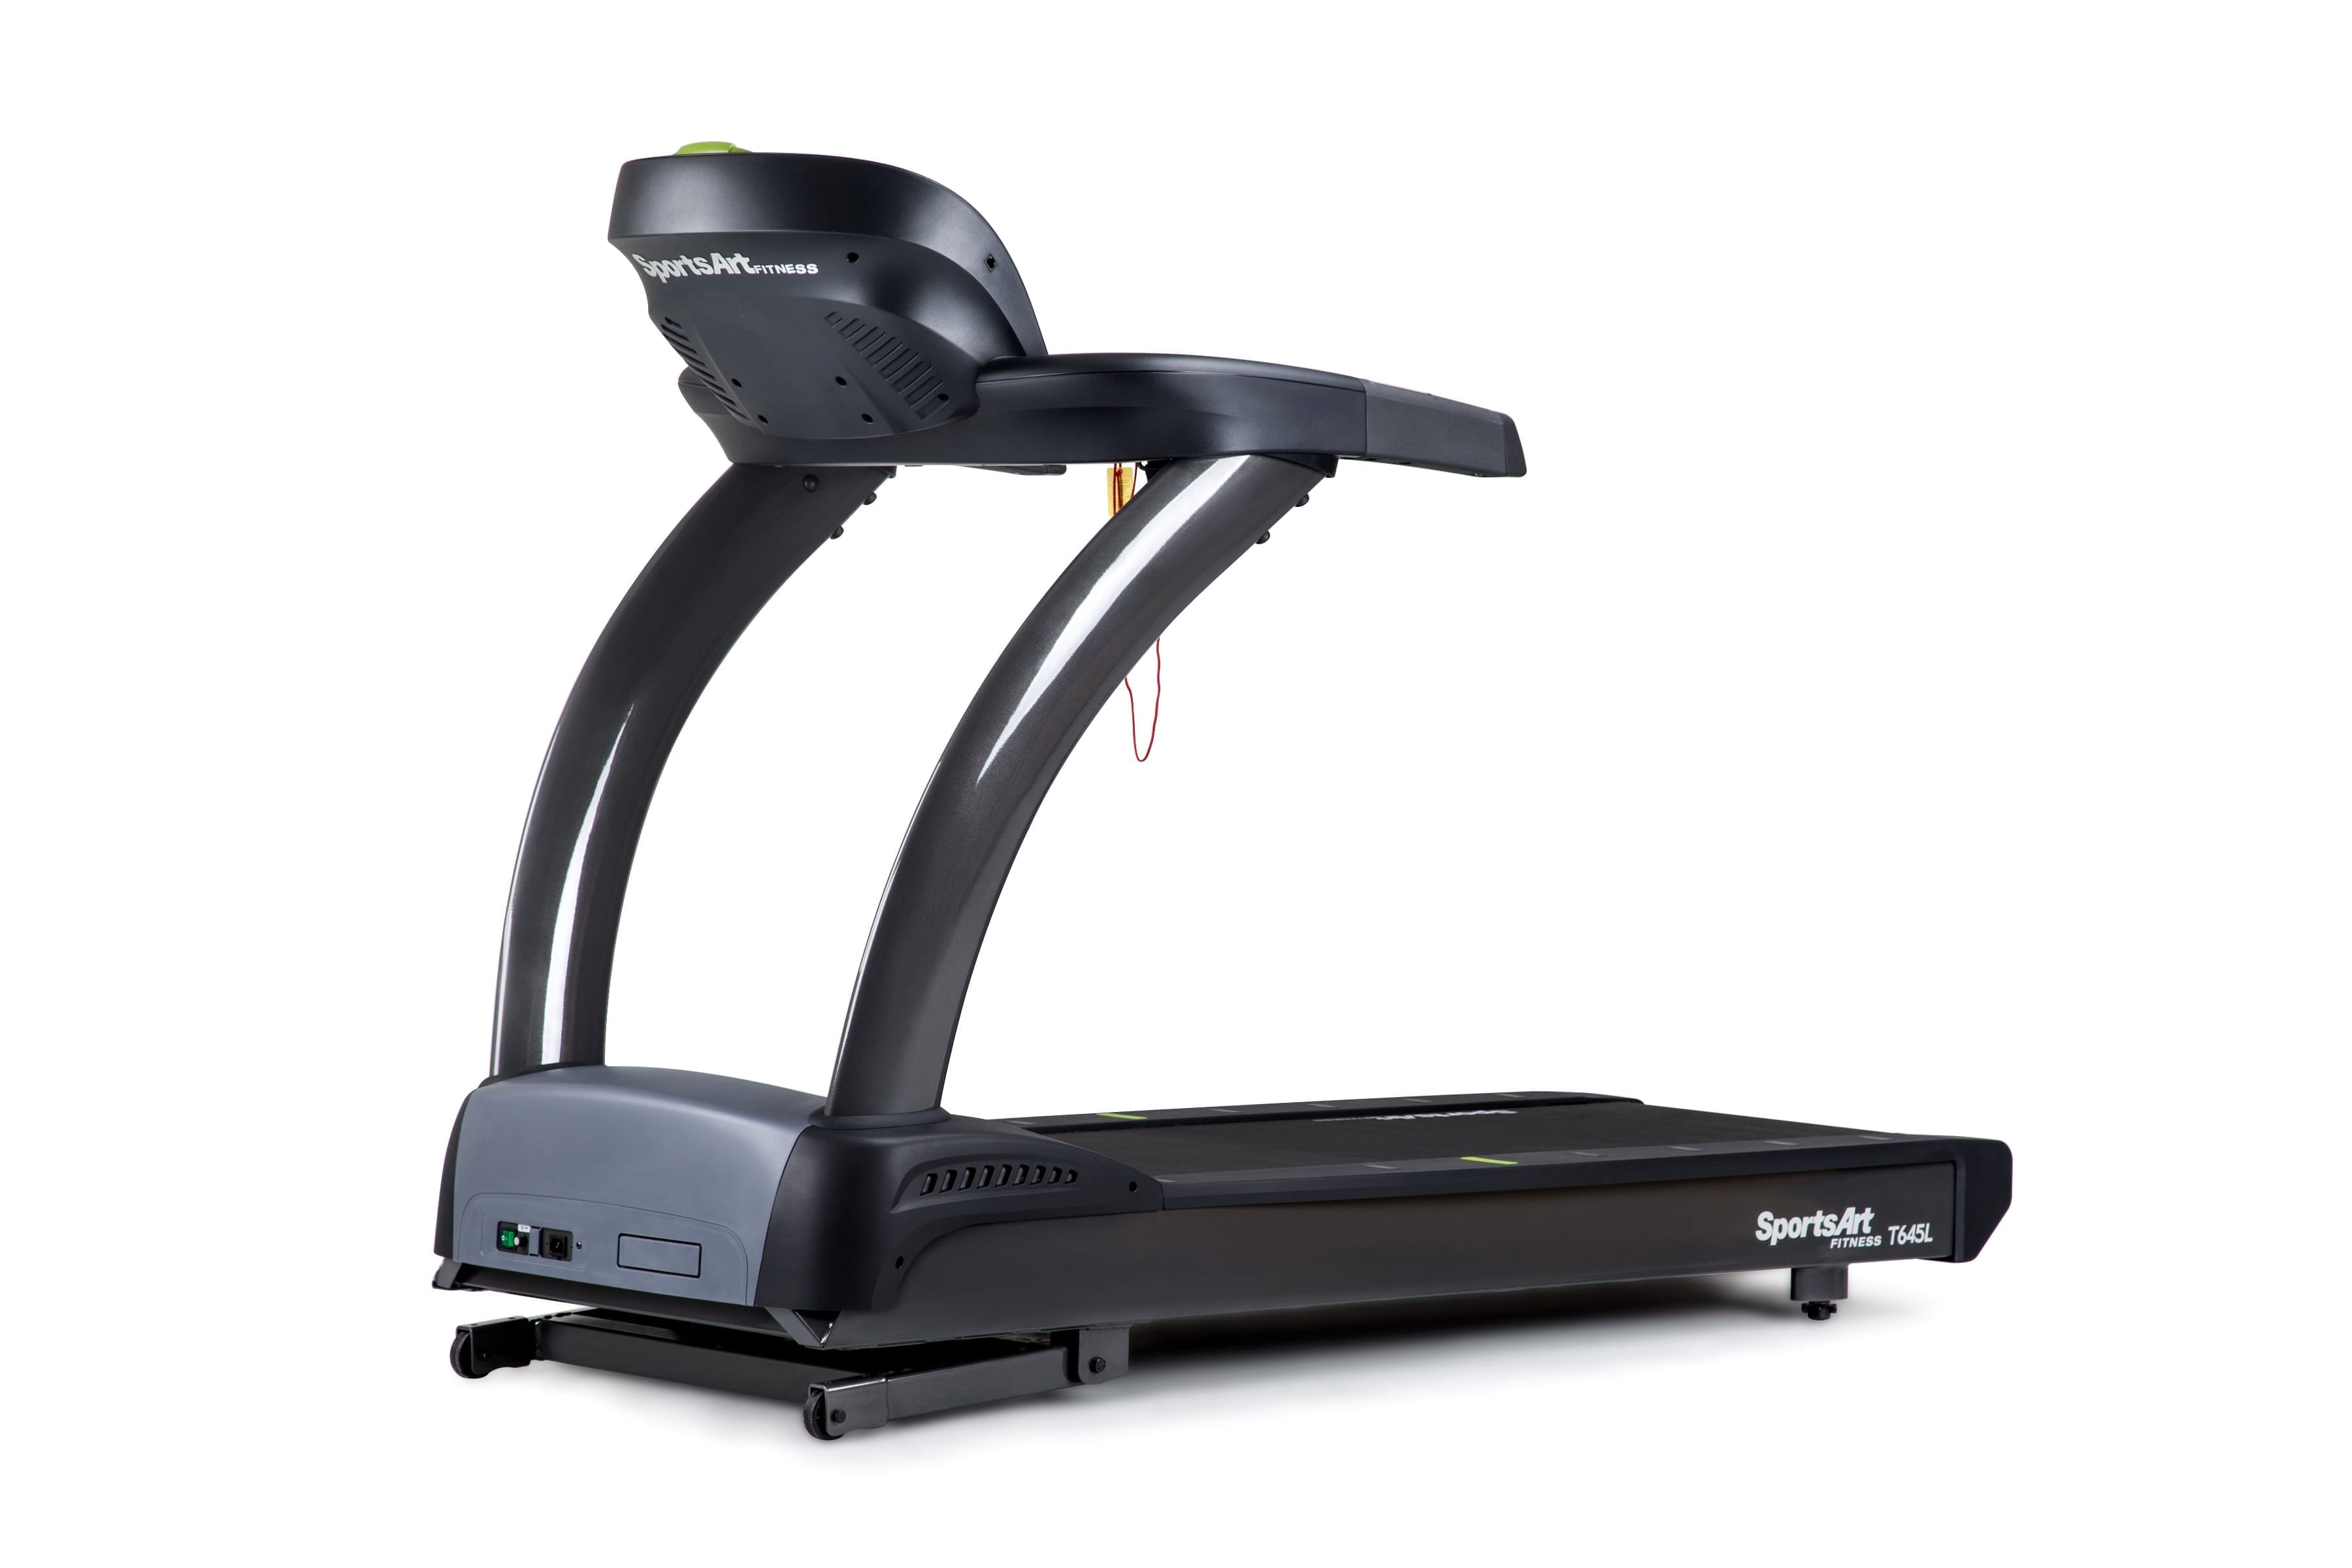 SportsArt Performance Treadmill T645L side view with console toward the left hand side